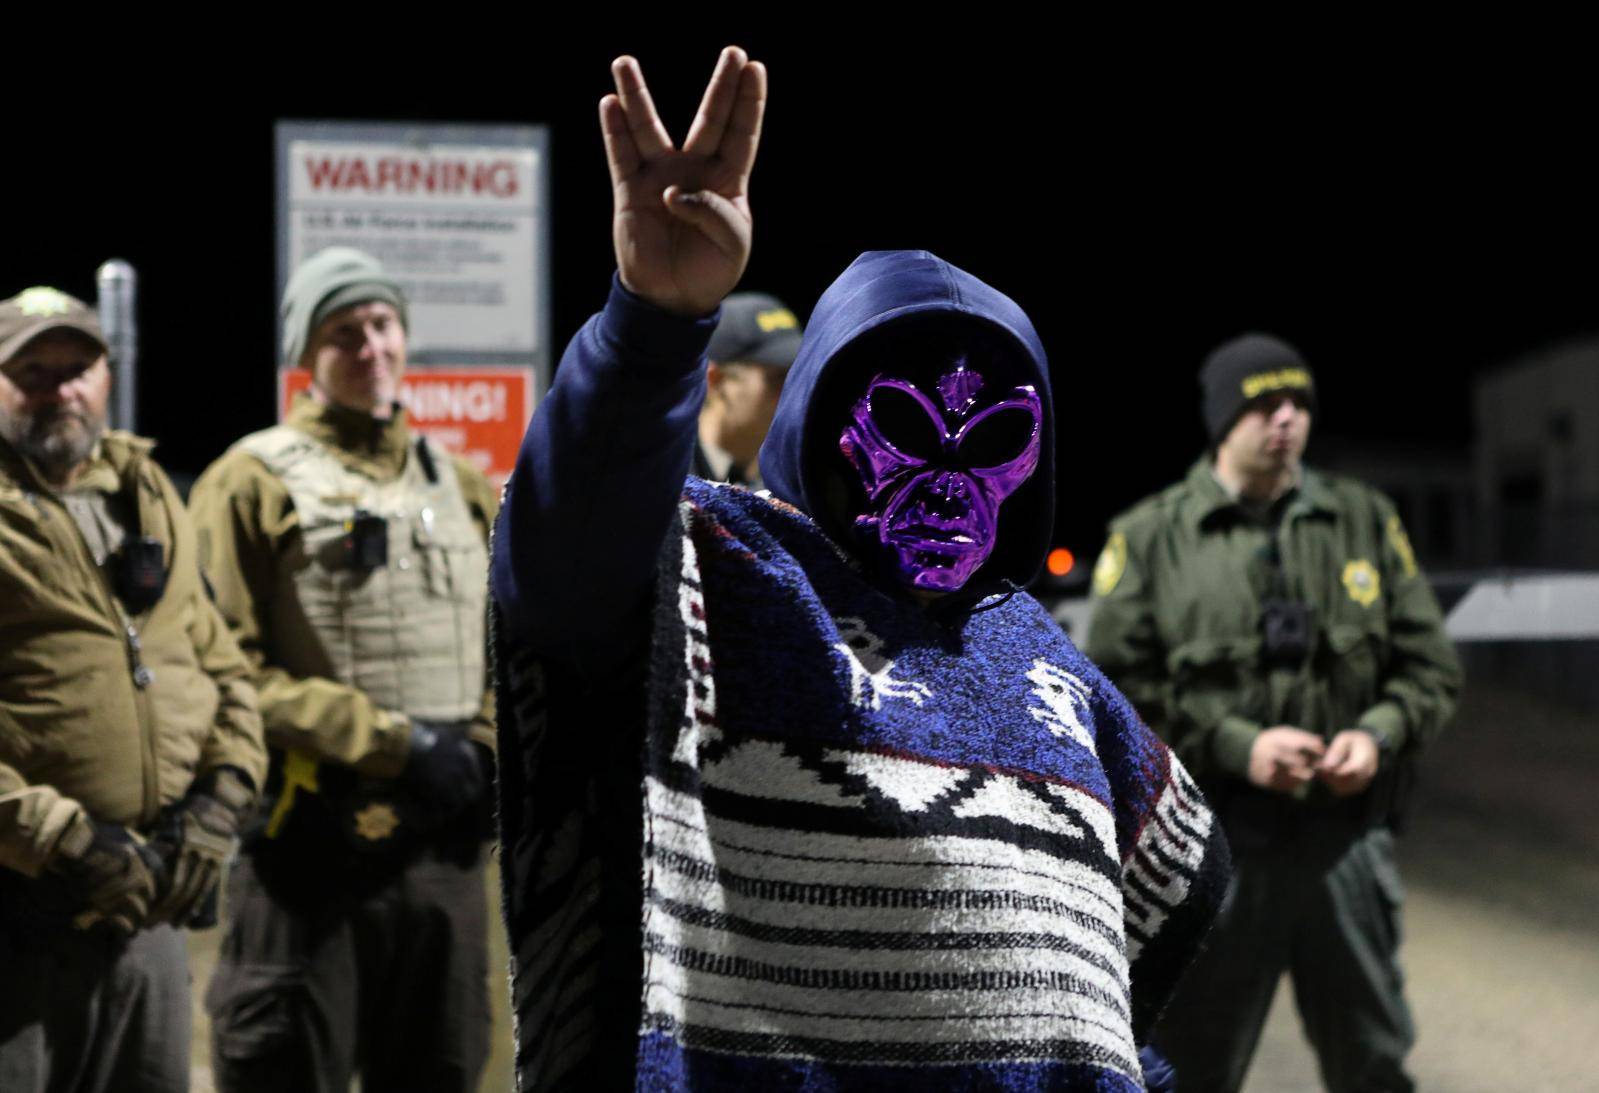 An attendee wears an alien mask at the gate of Area 51 as an influx of tourists responding to a call to 'storm' Area 51, a secretive U.S. military base believed by UFO enthusiasts to hold government secrets about extra-terrestrials, is expected in Rachel